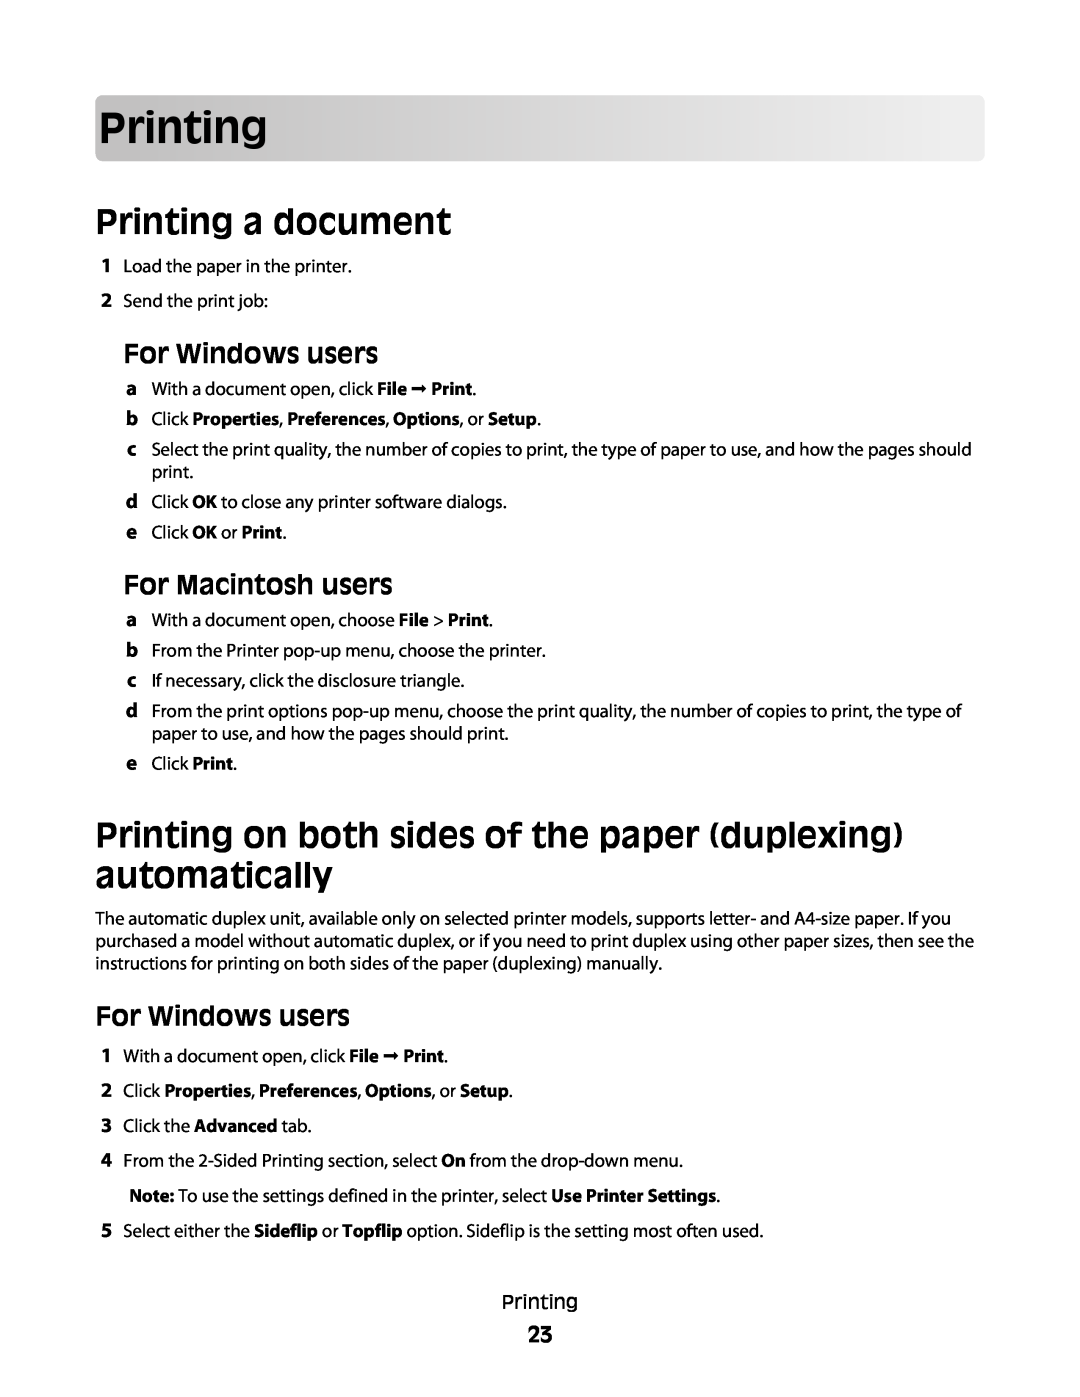 Lexmark Pro800 manual Prin ting, Printing a document, b Click Properties, Preferences, Options, or Setup, For Windows users 